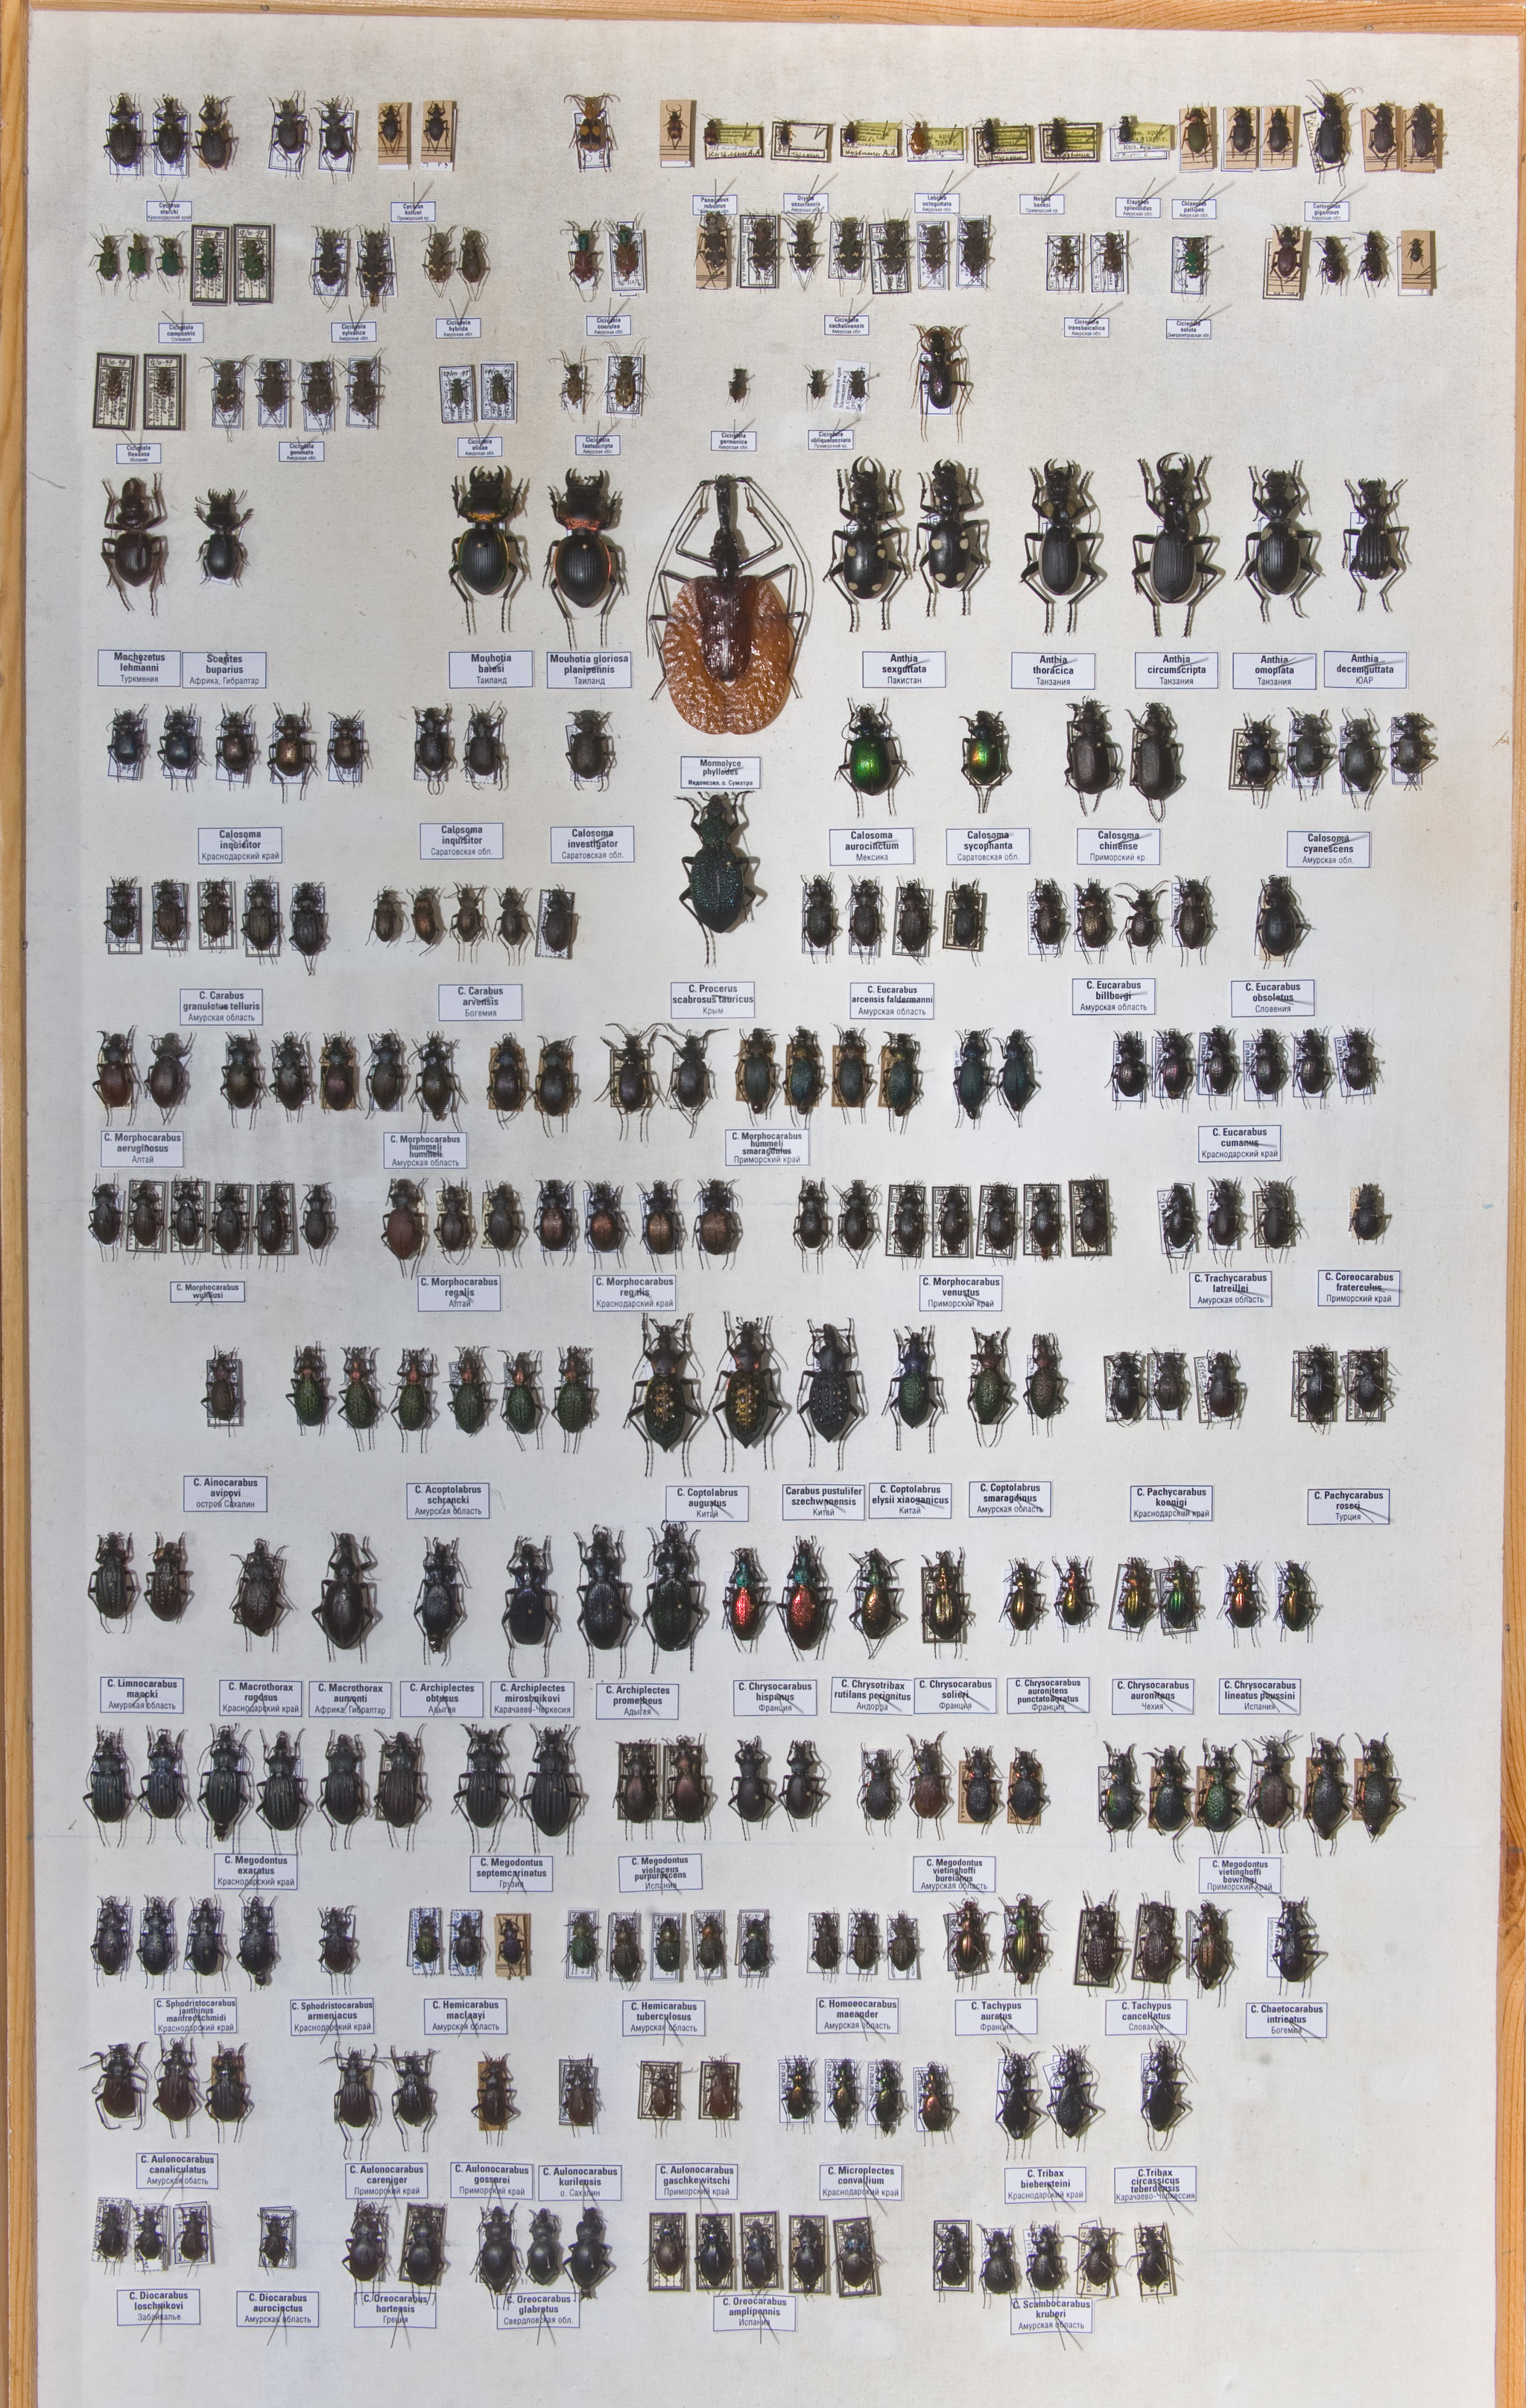 Also a collection - My, Жуки, Entomology, Insects, Longpost, Collection